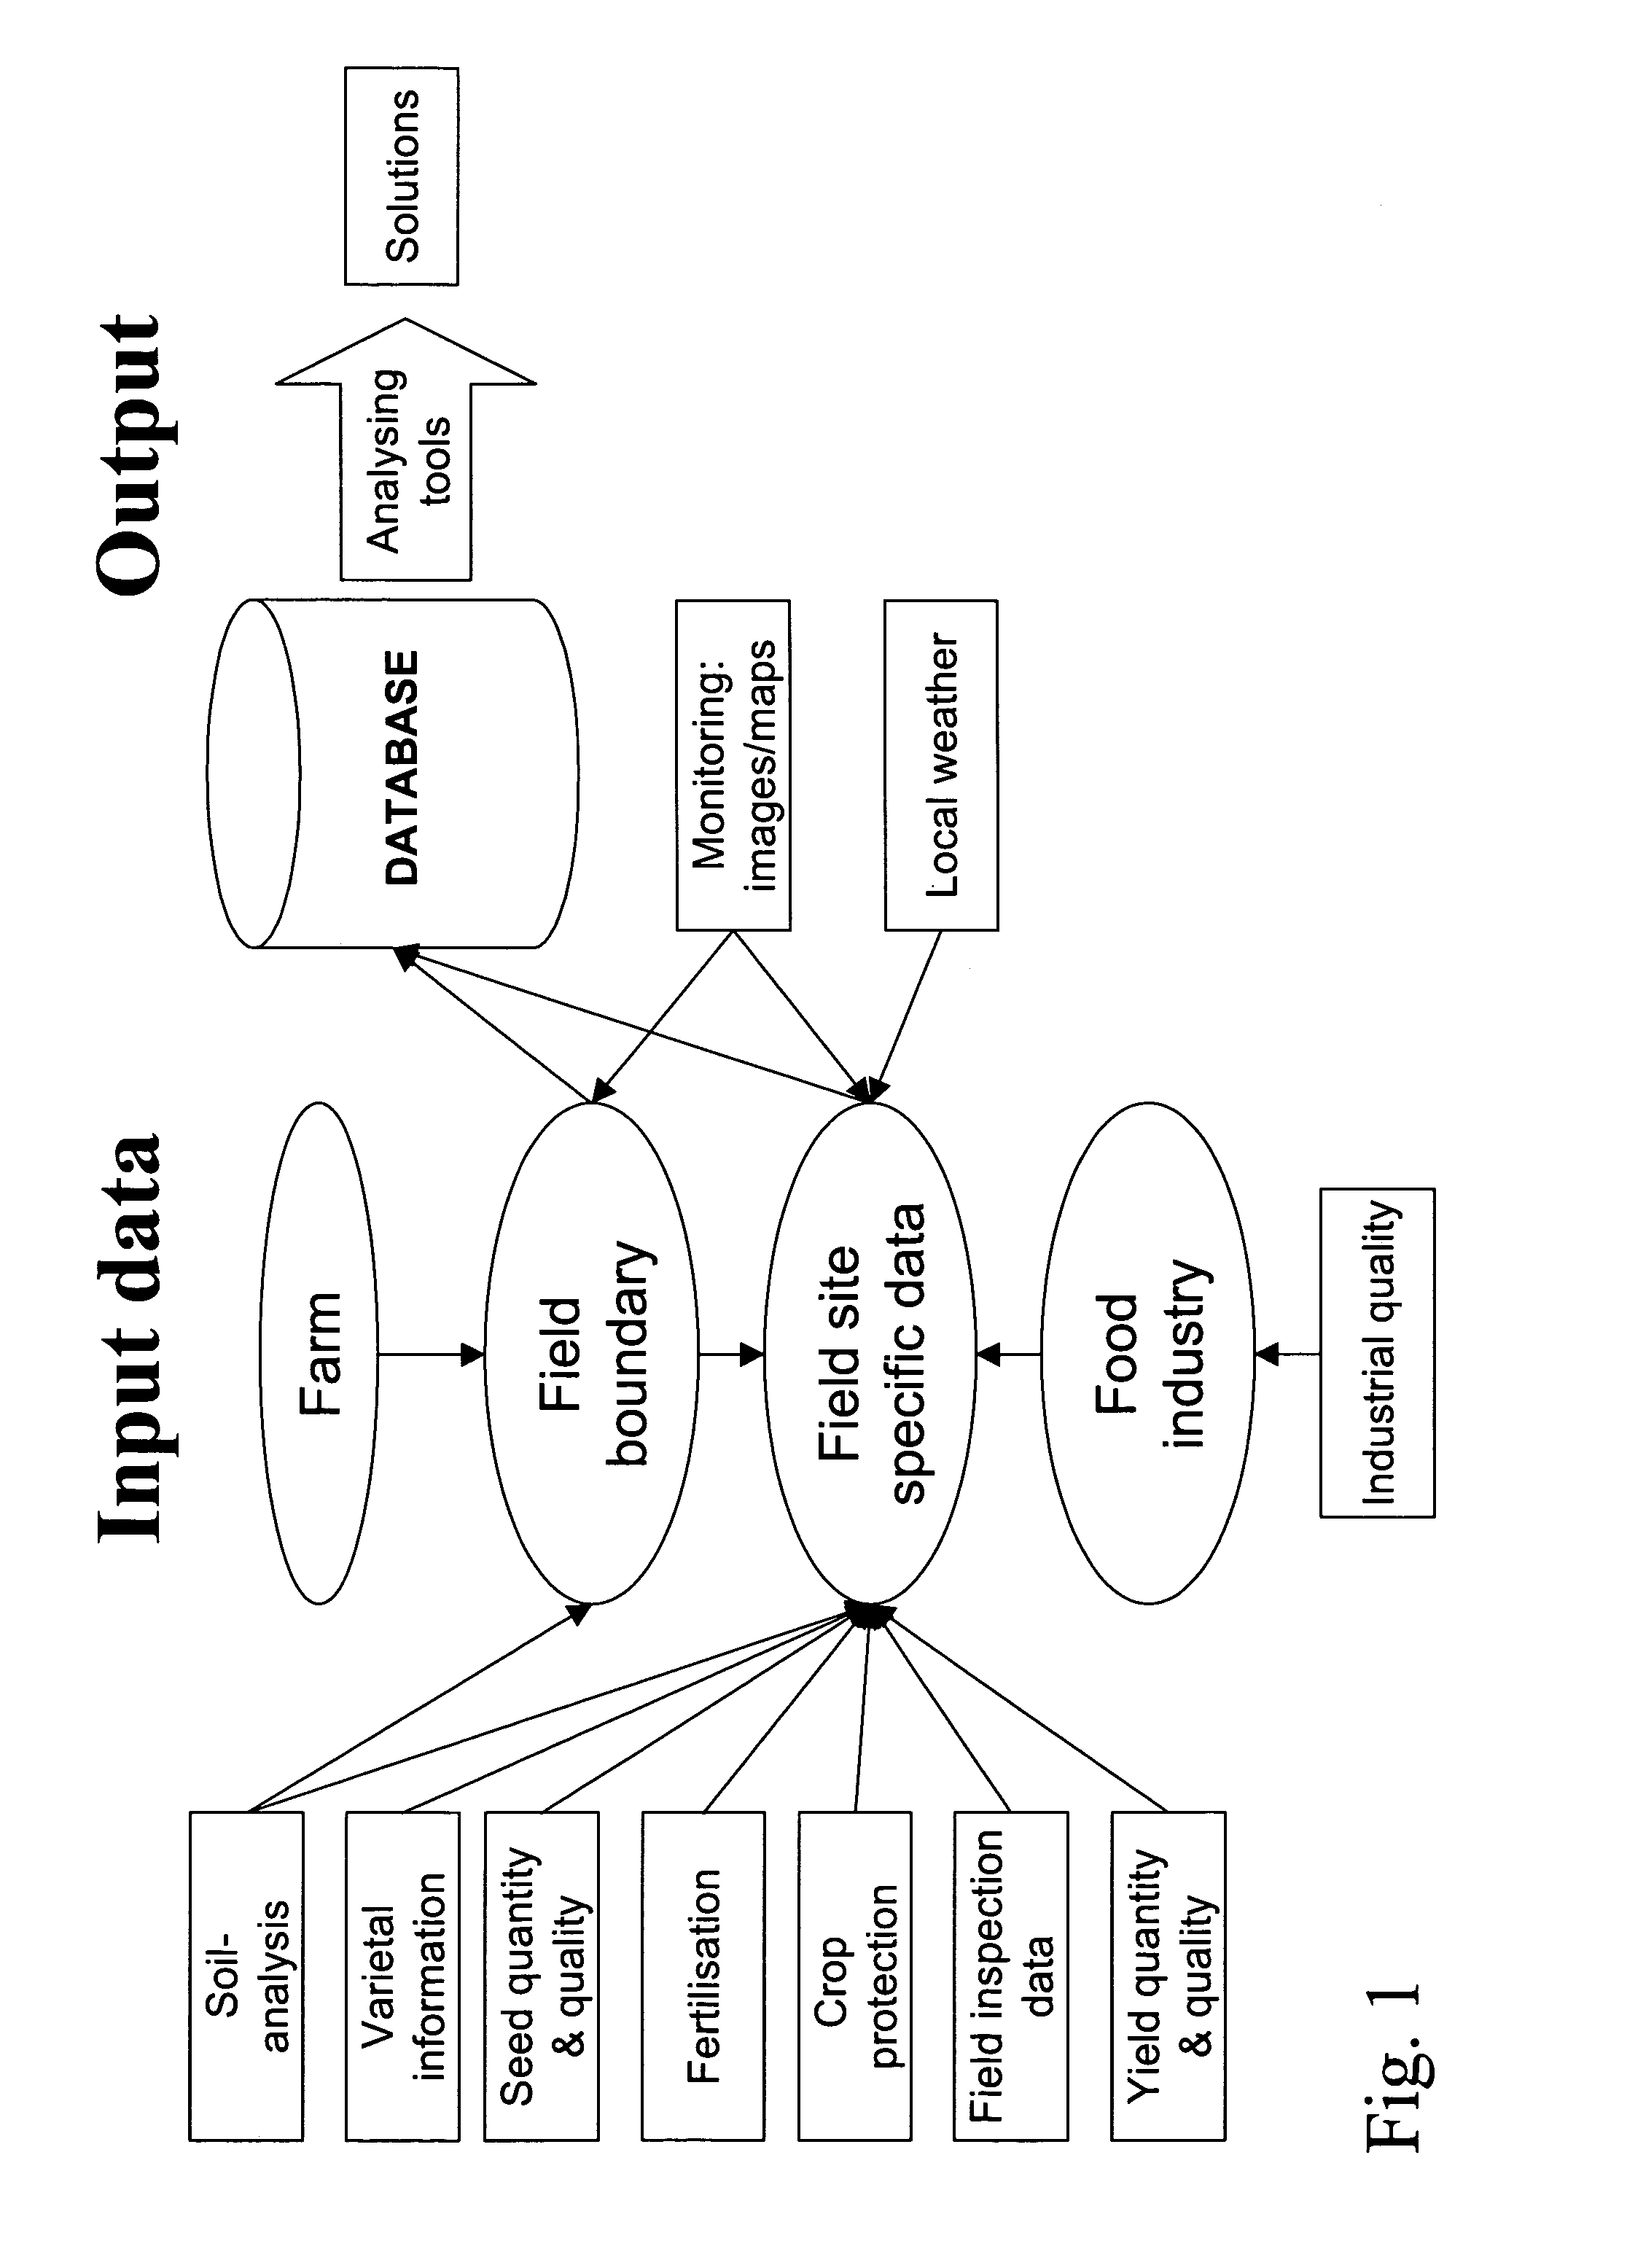 Method and system for analyzing site-specific growth factors limiting production